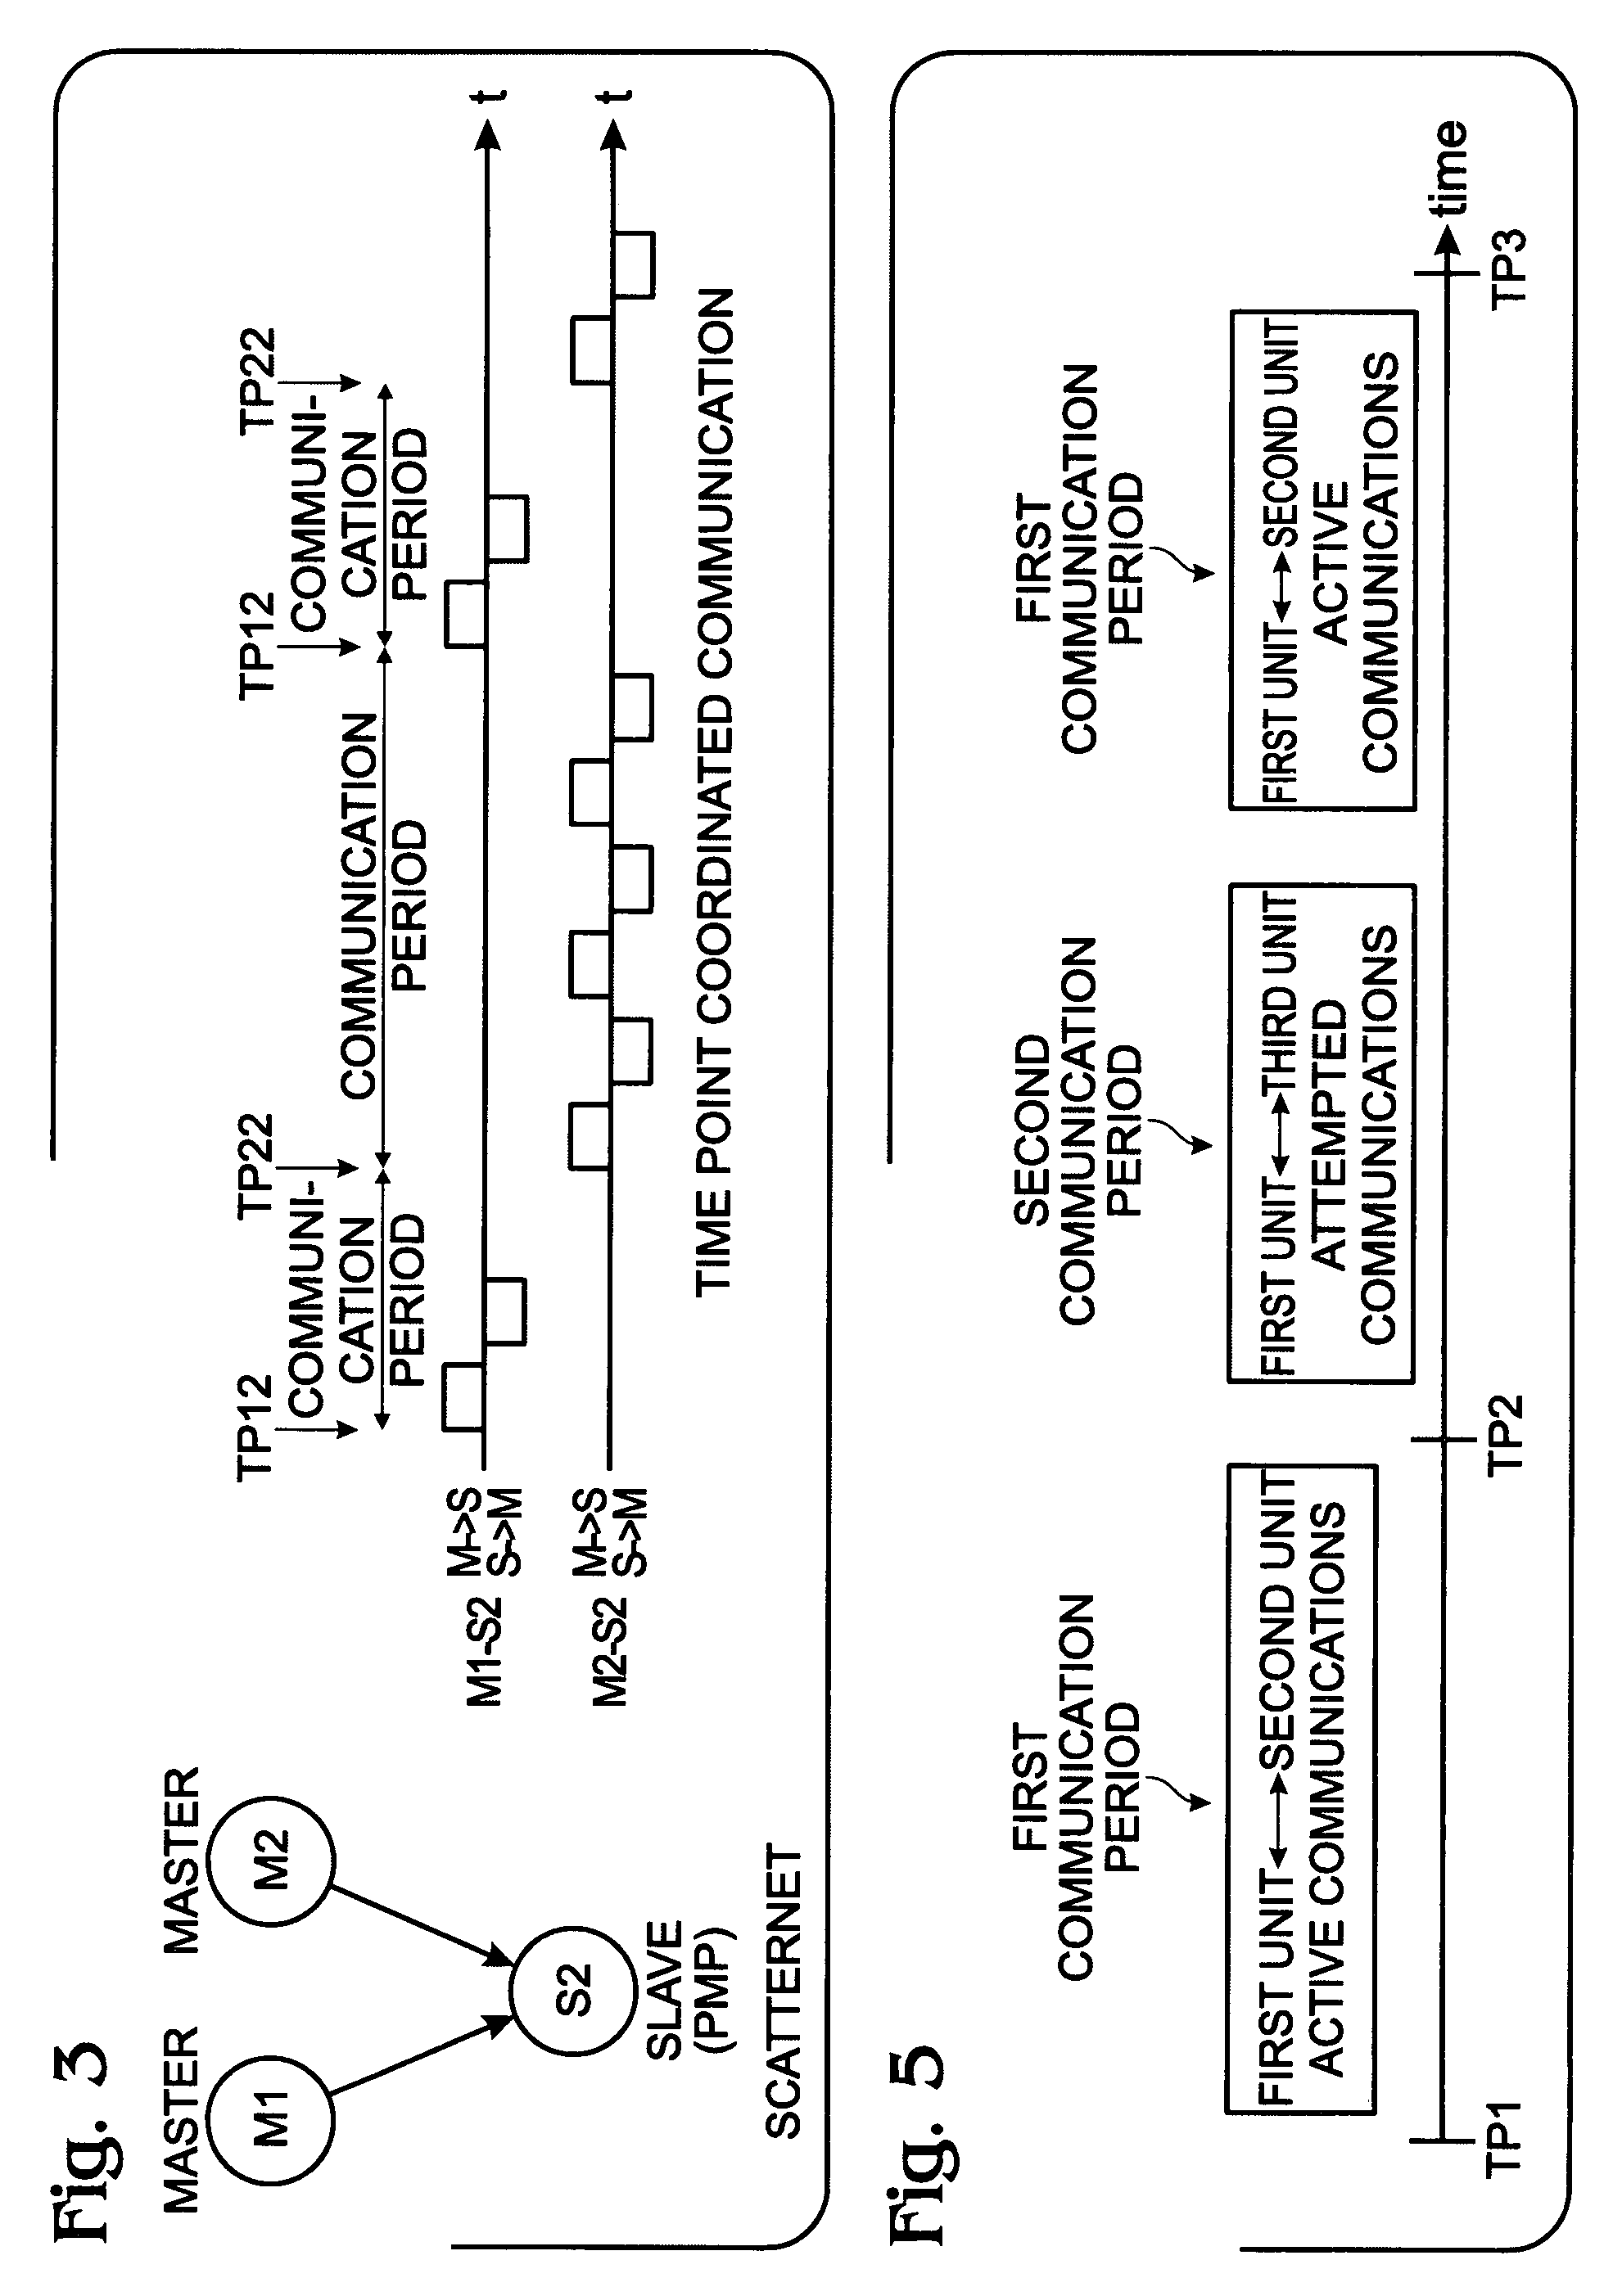 System and method for reestablishing a communication period in a rendezvous scheduled system